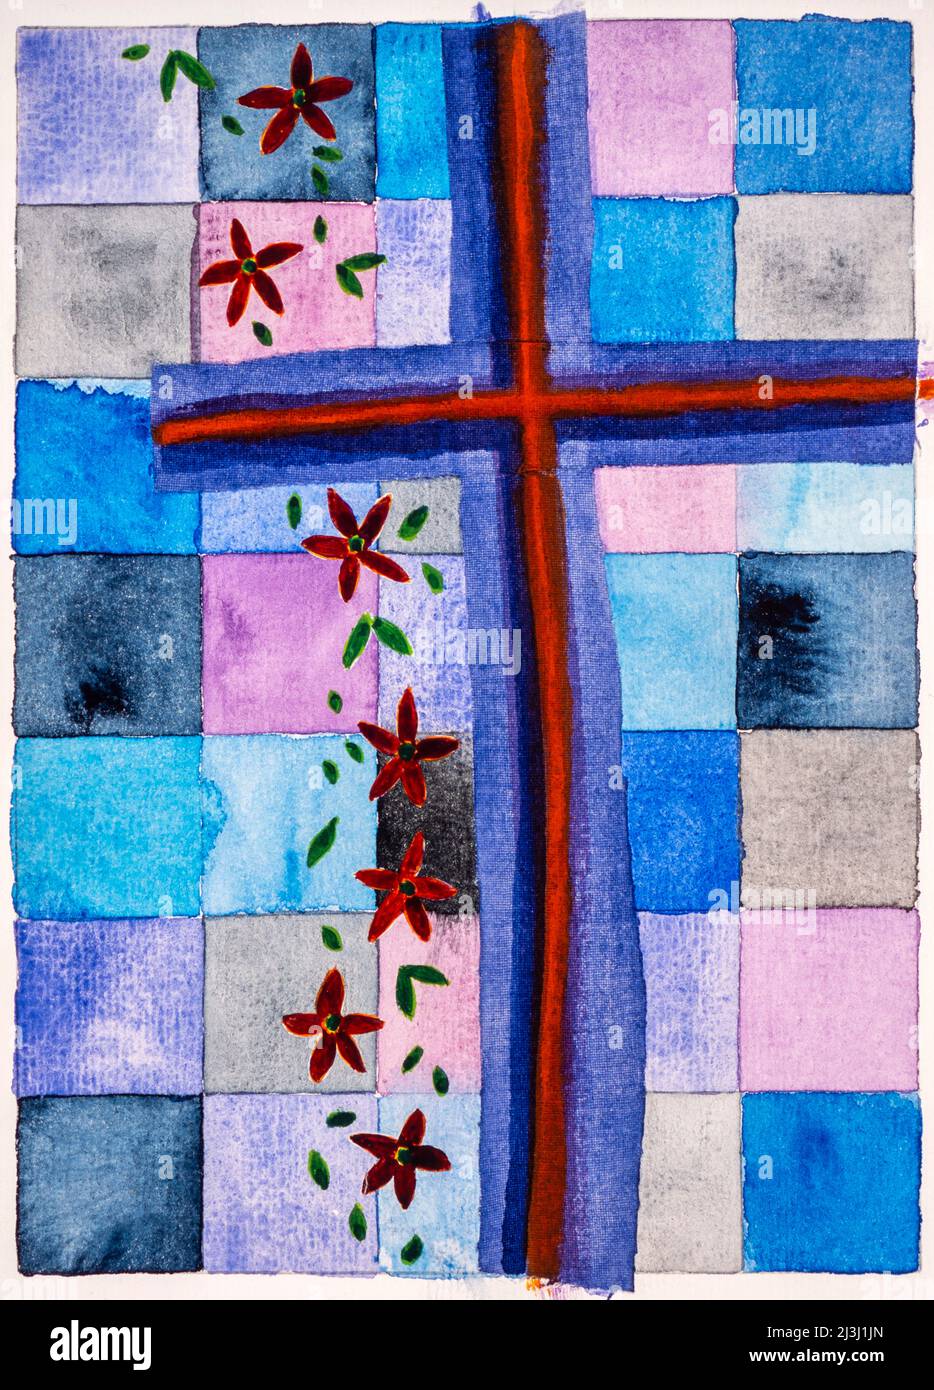 Watercolor by Heidrun Füssenhäuser Blue-red dark cross, background lighter. Red flowers and green leaves fall and point to the transience of life . Stock Photo